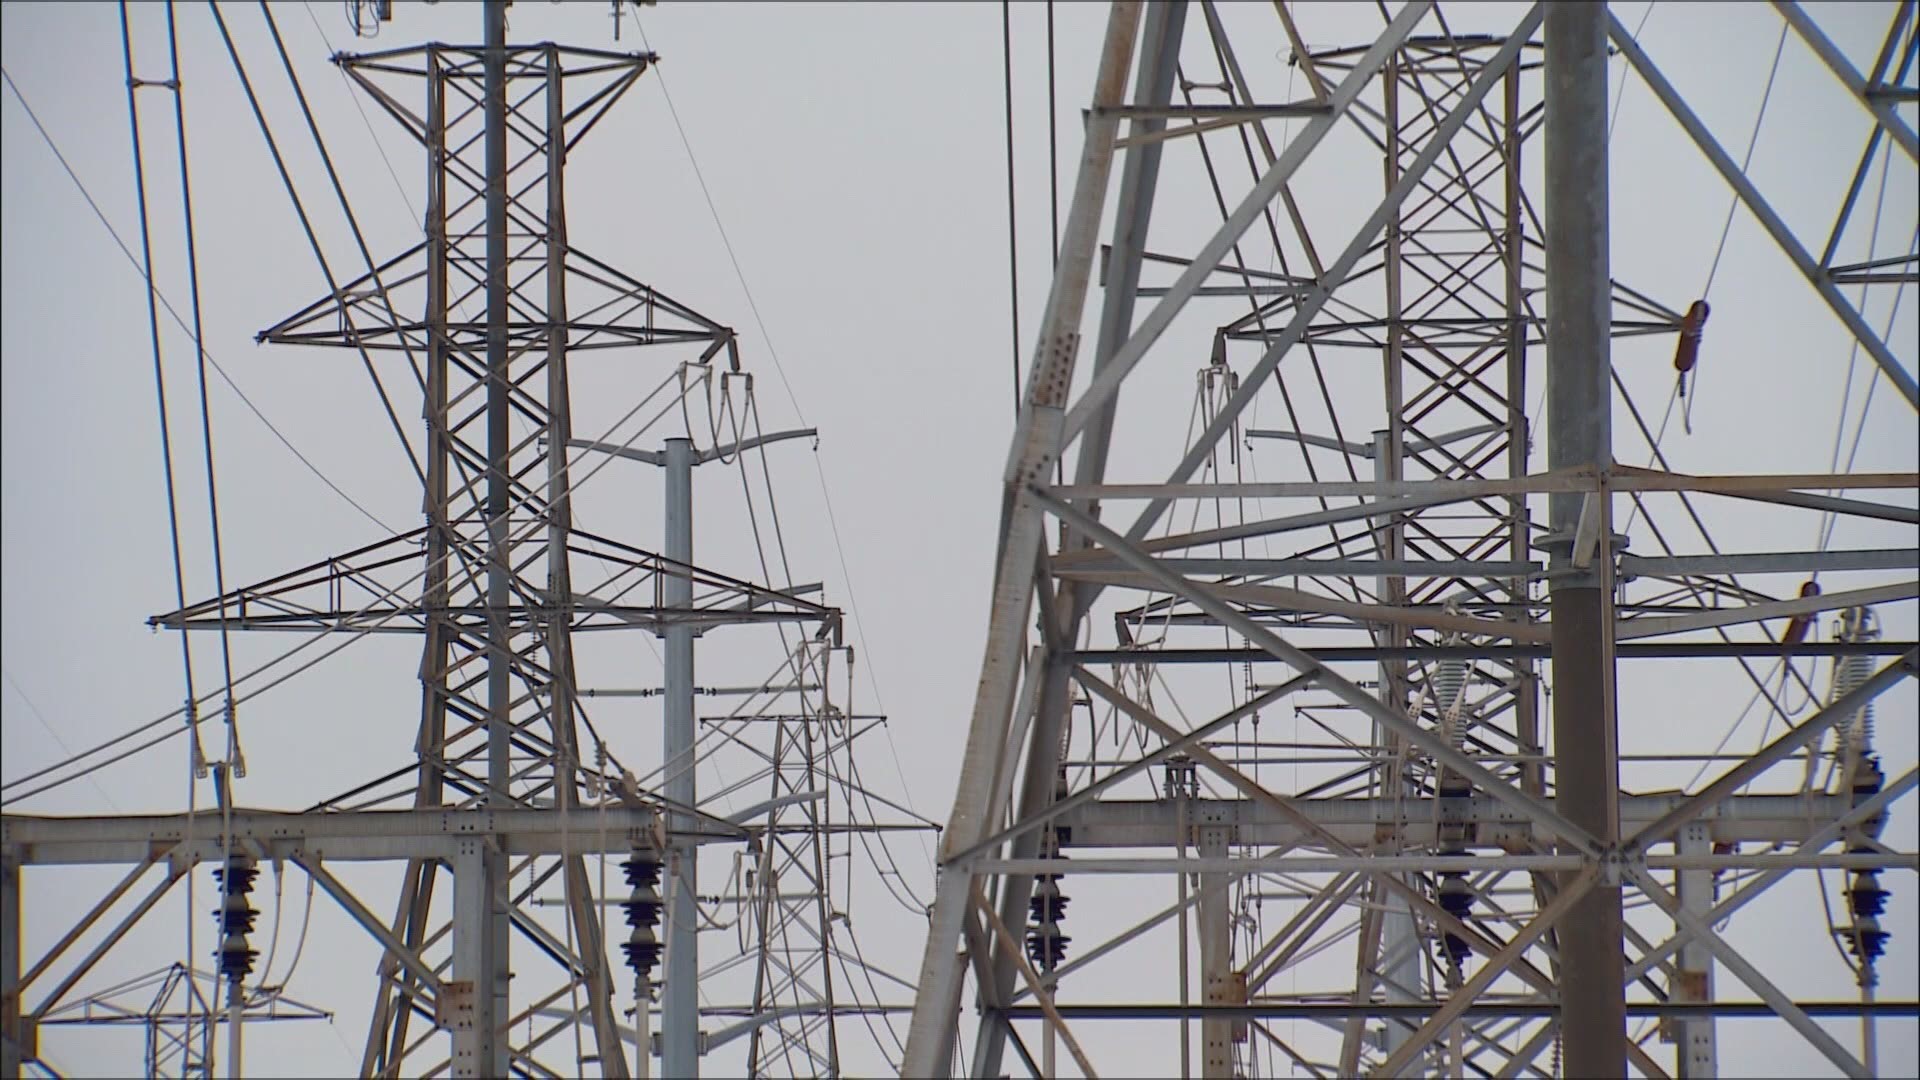 Lawmakers say they are working to put requirements in place to make sure such power outages don't happen again.